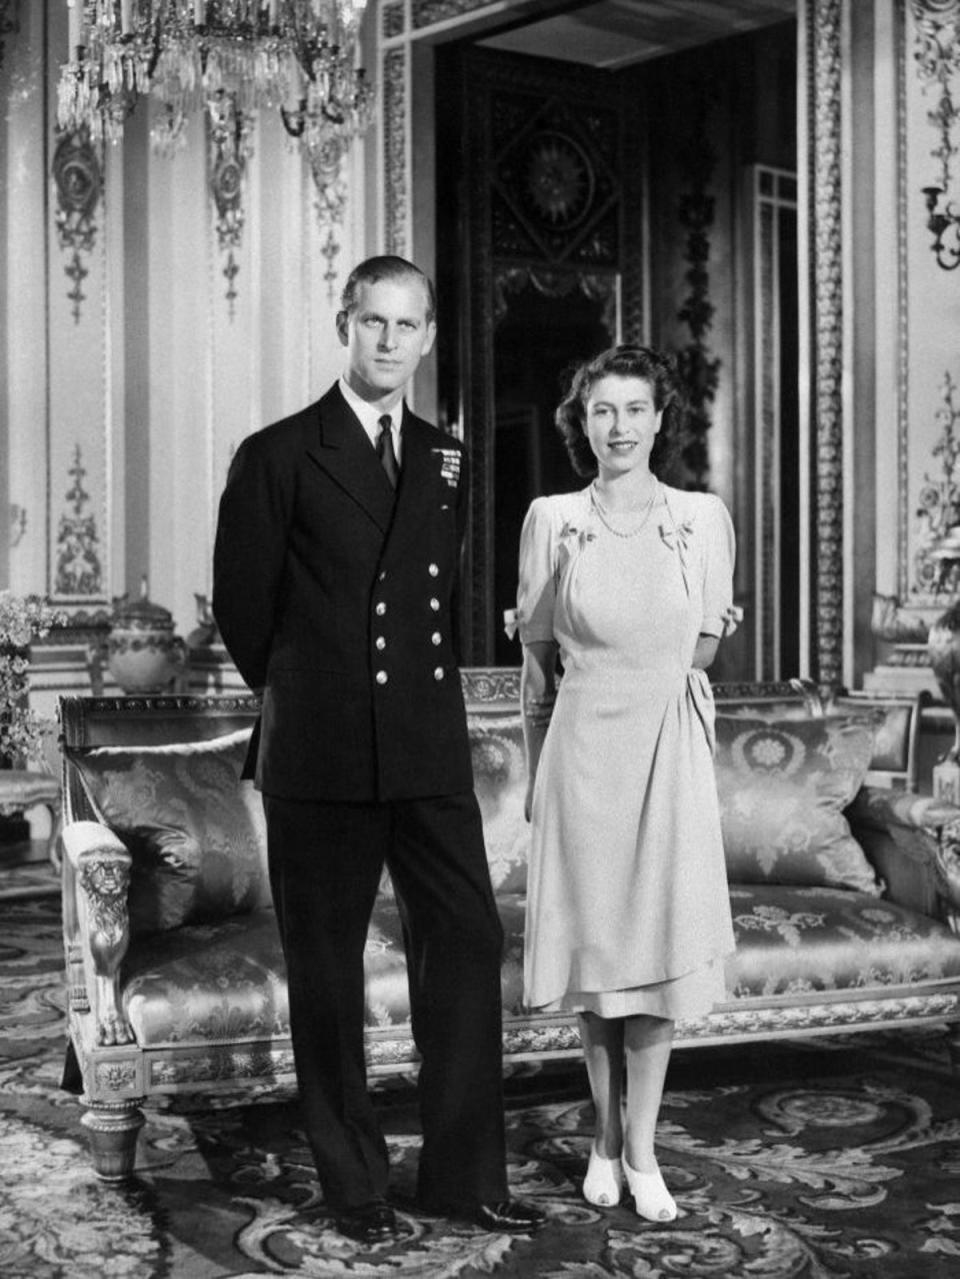 The official announcement of Princess Elizabeth and Phillip Mountbatten's engagement in 1947. The pairing was incredibly controversial as Prince Phillip had no financial standing and he was foreign born (though he served Britain in the war and was given British Citizenship) (Getty)